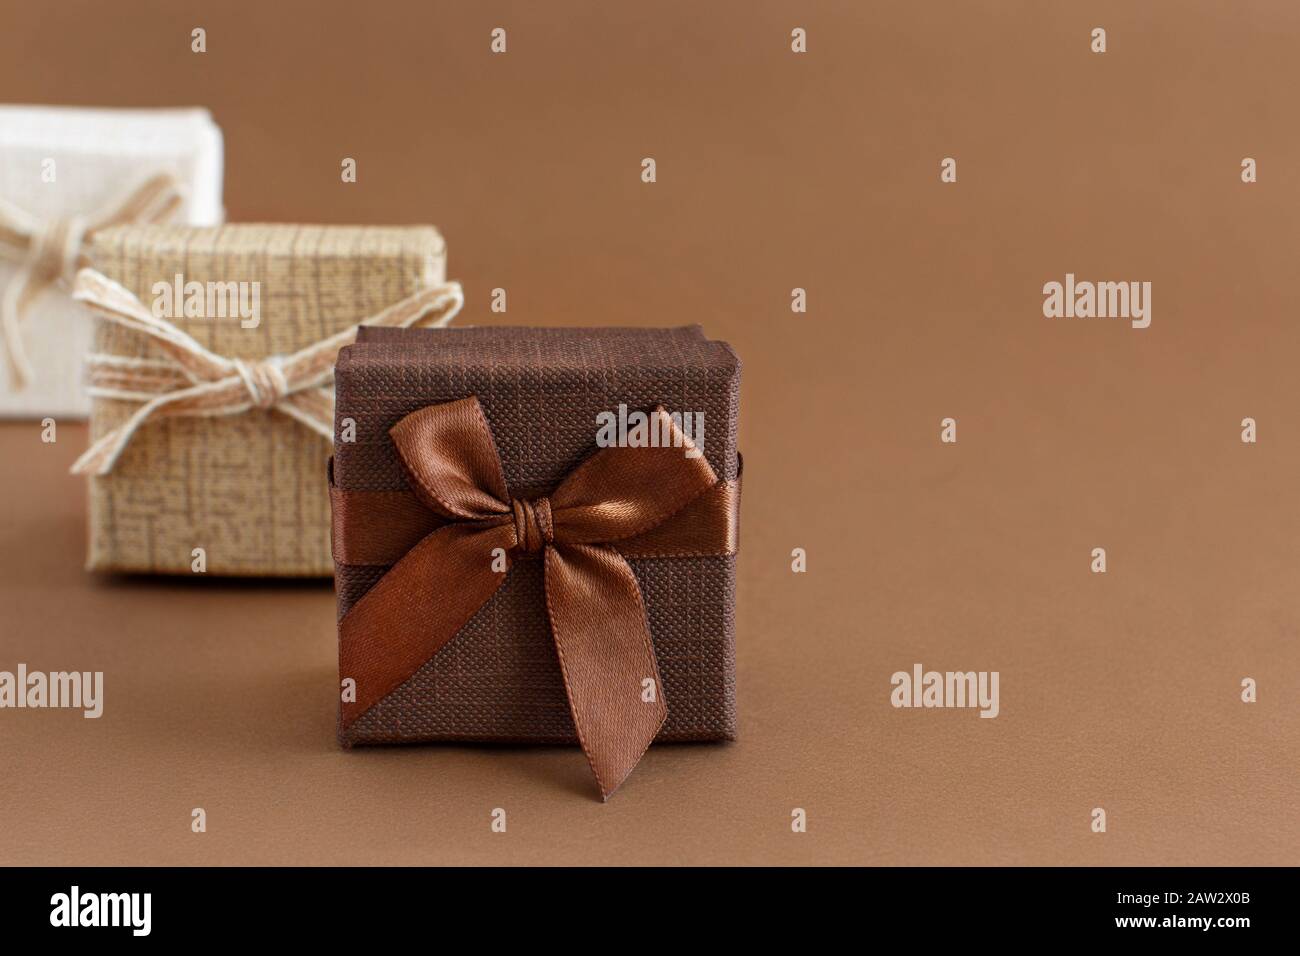 Brown tones gift boxes on a brown background close up Stock Photo